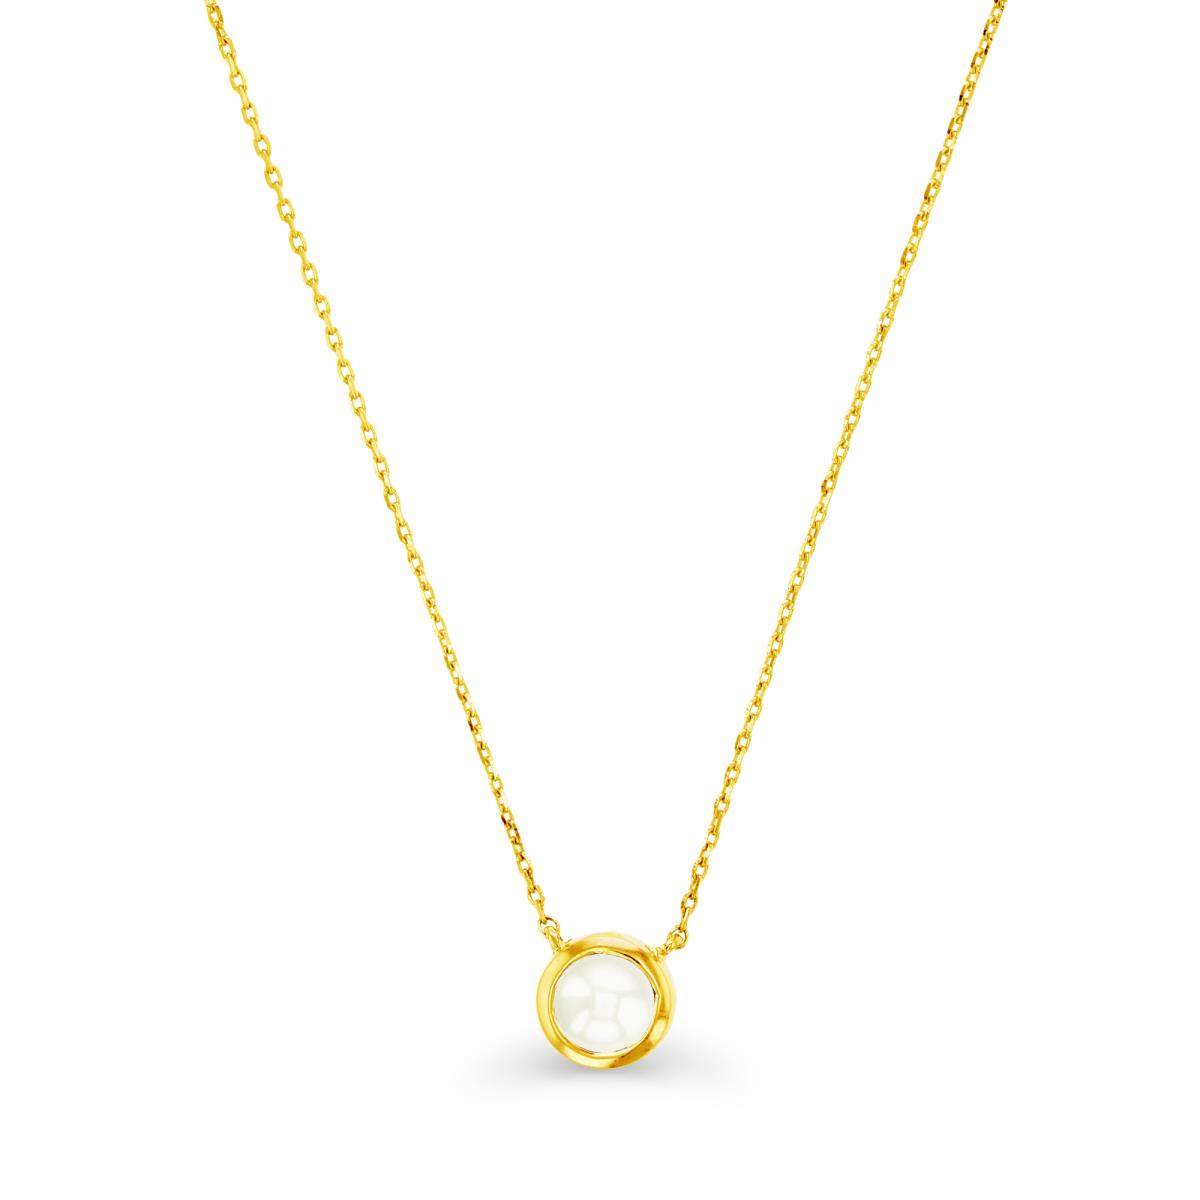 10K Yellow Gold & 5mm Rd Pearl Bezel Set Necklace